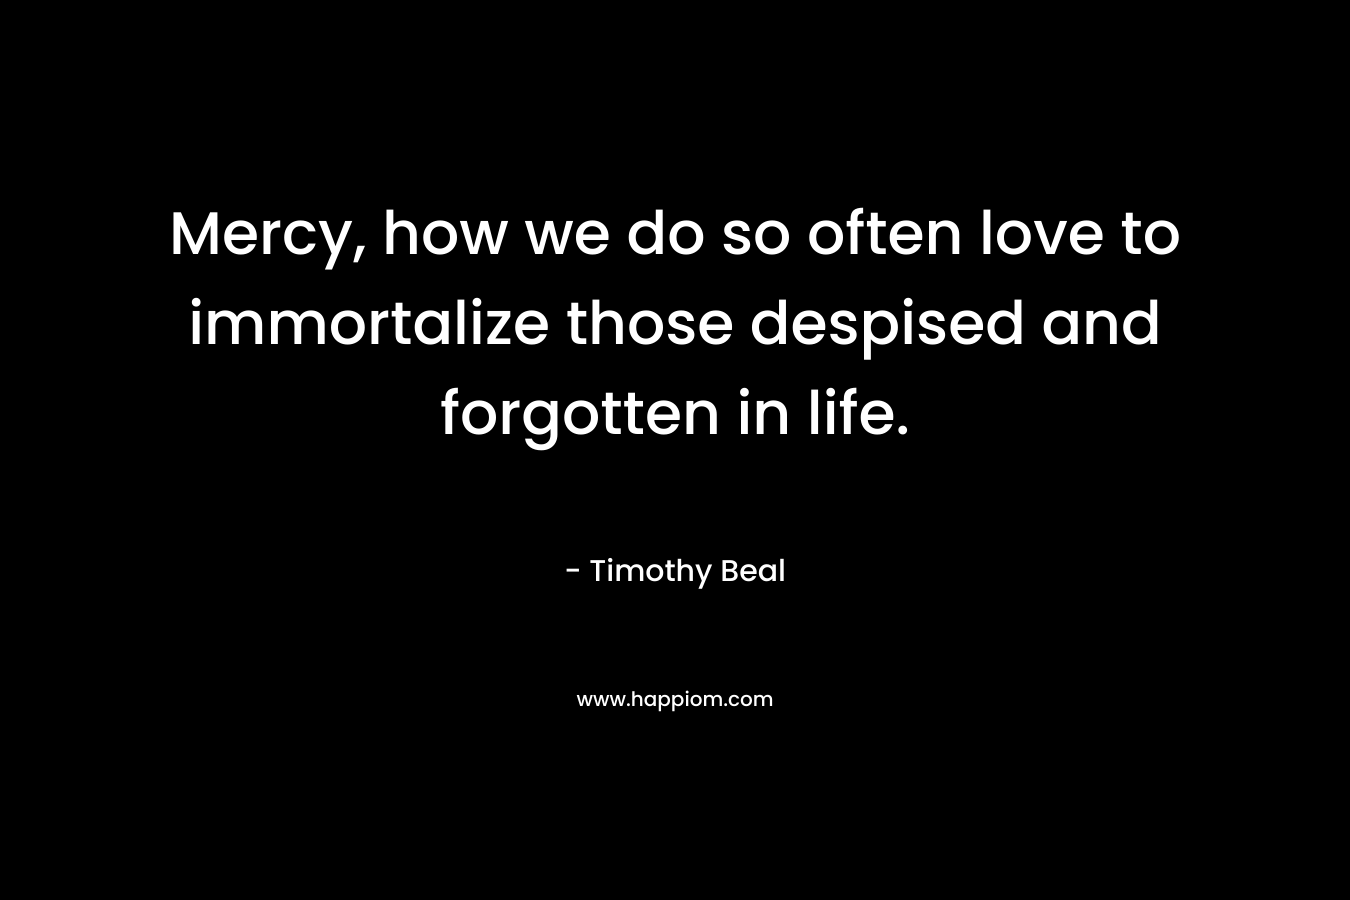 Mercy, how we do so often love to immortalize those despised and forgotten in life. – Timothy Beal